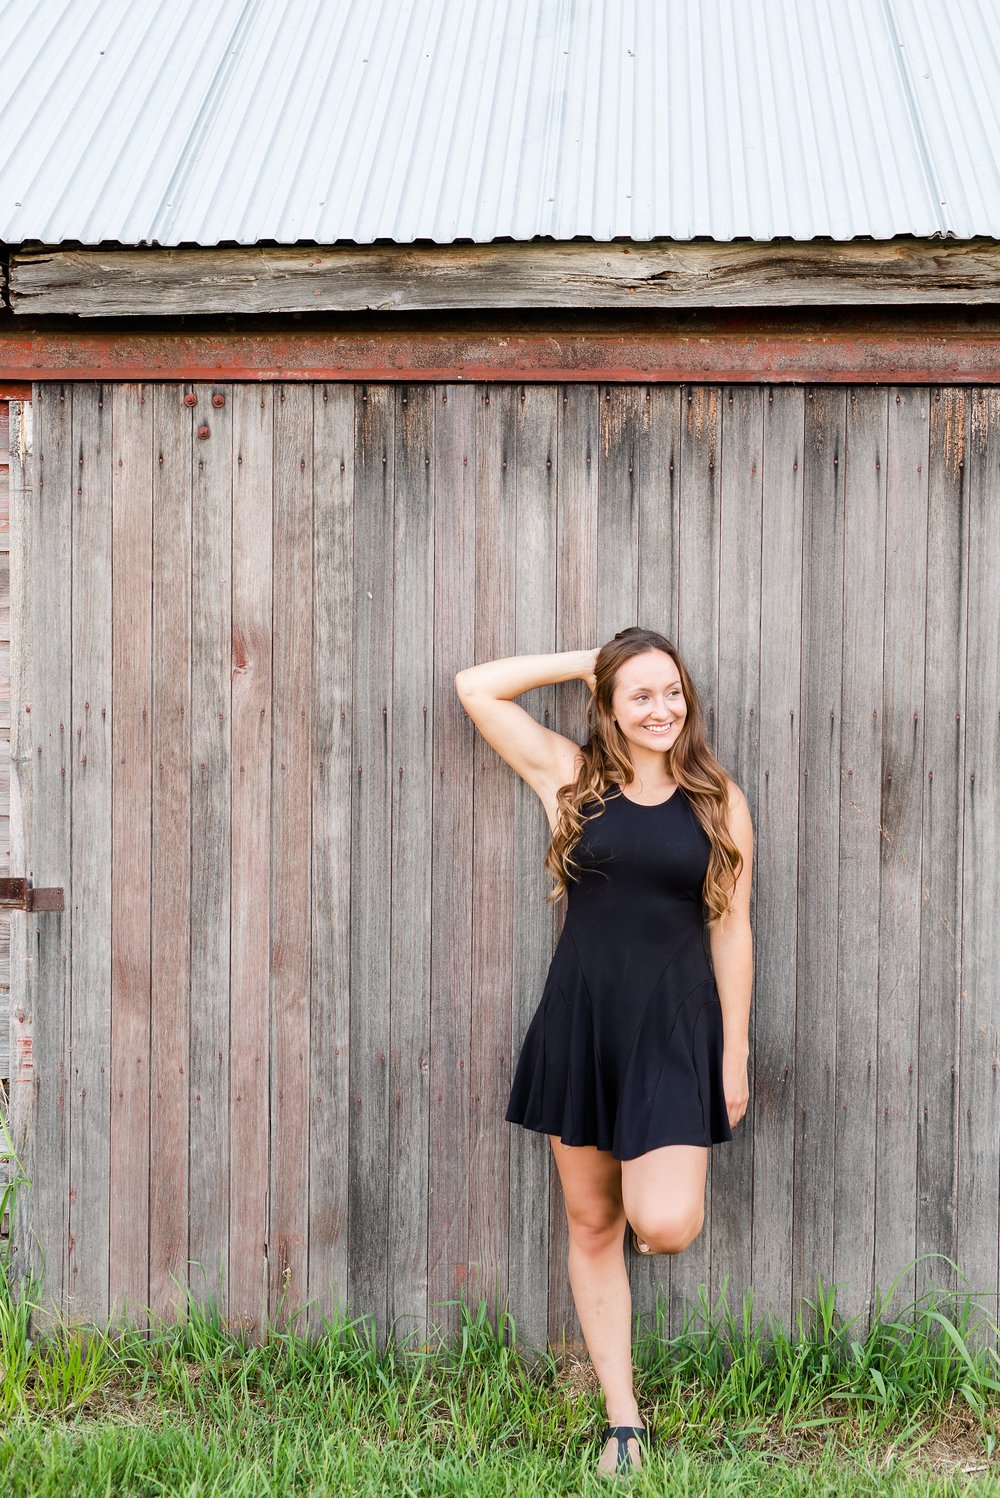 Rural Minnesota High School Senior Session with Hay Bales and by the Lake near Audubon, MN | Livi